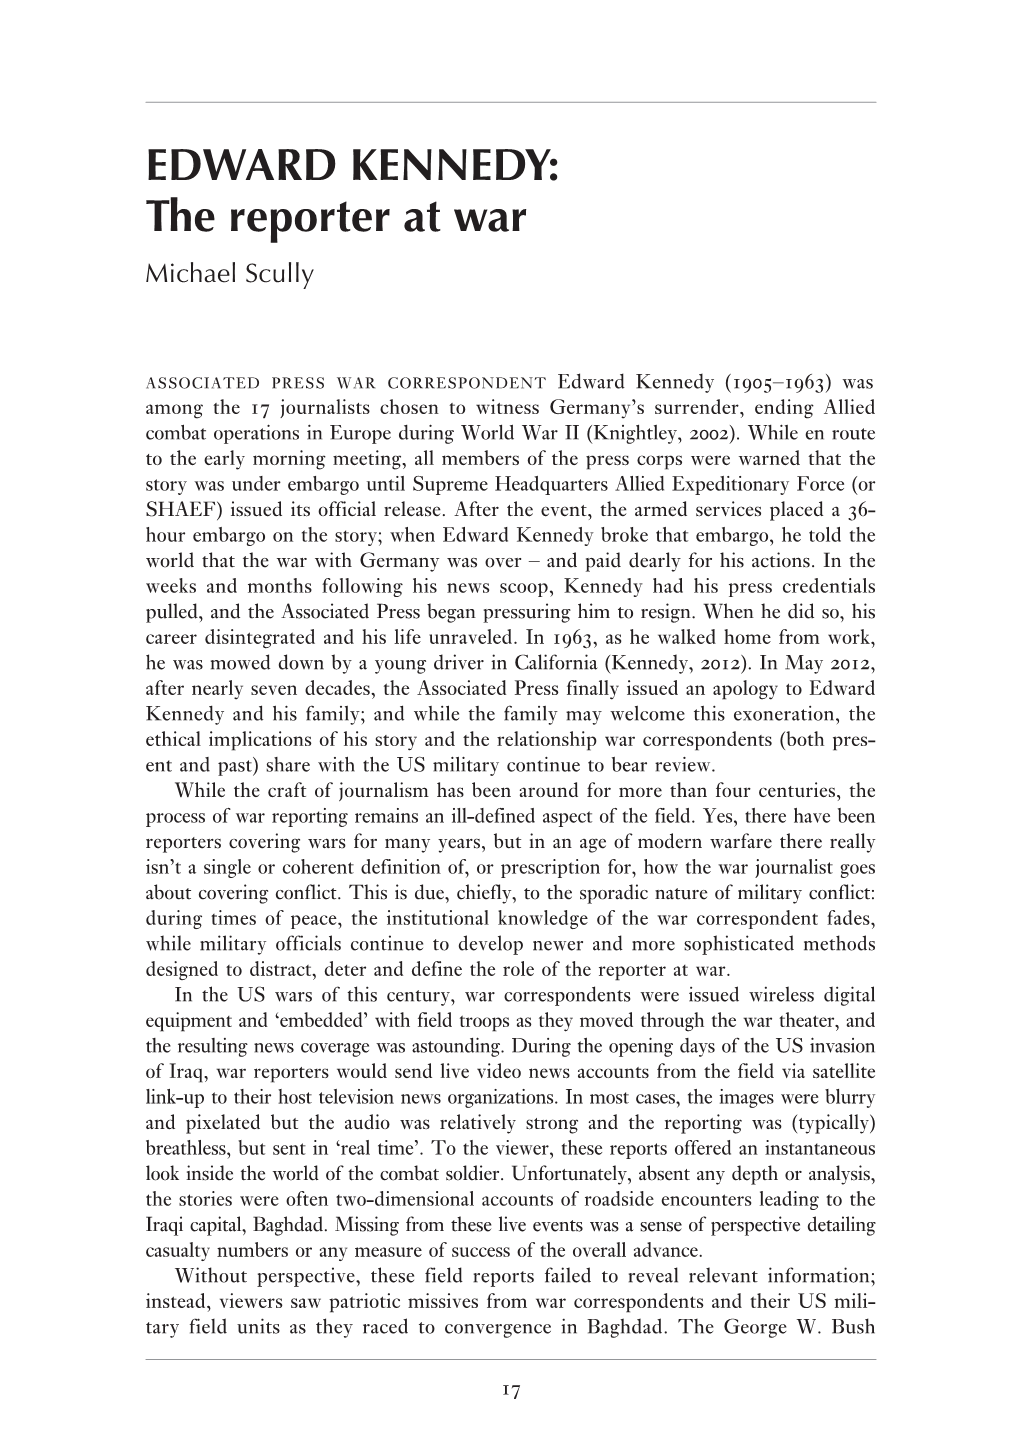 EDWARD KENNEDY: the Reporter at War Michael Scully